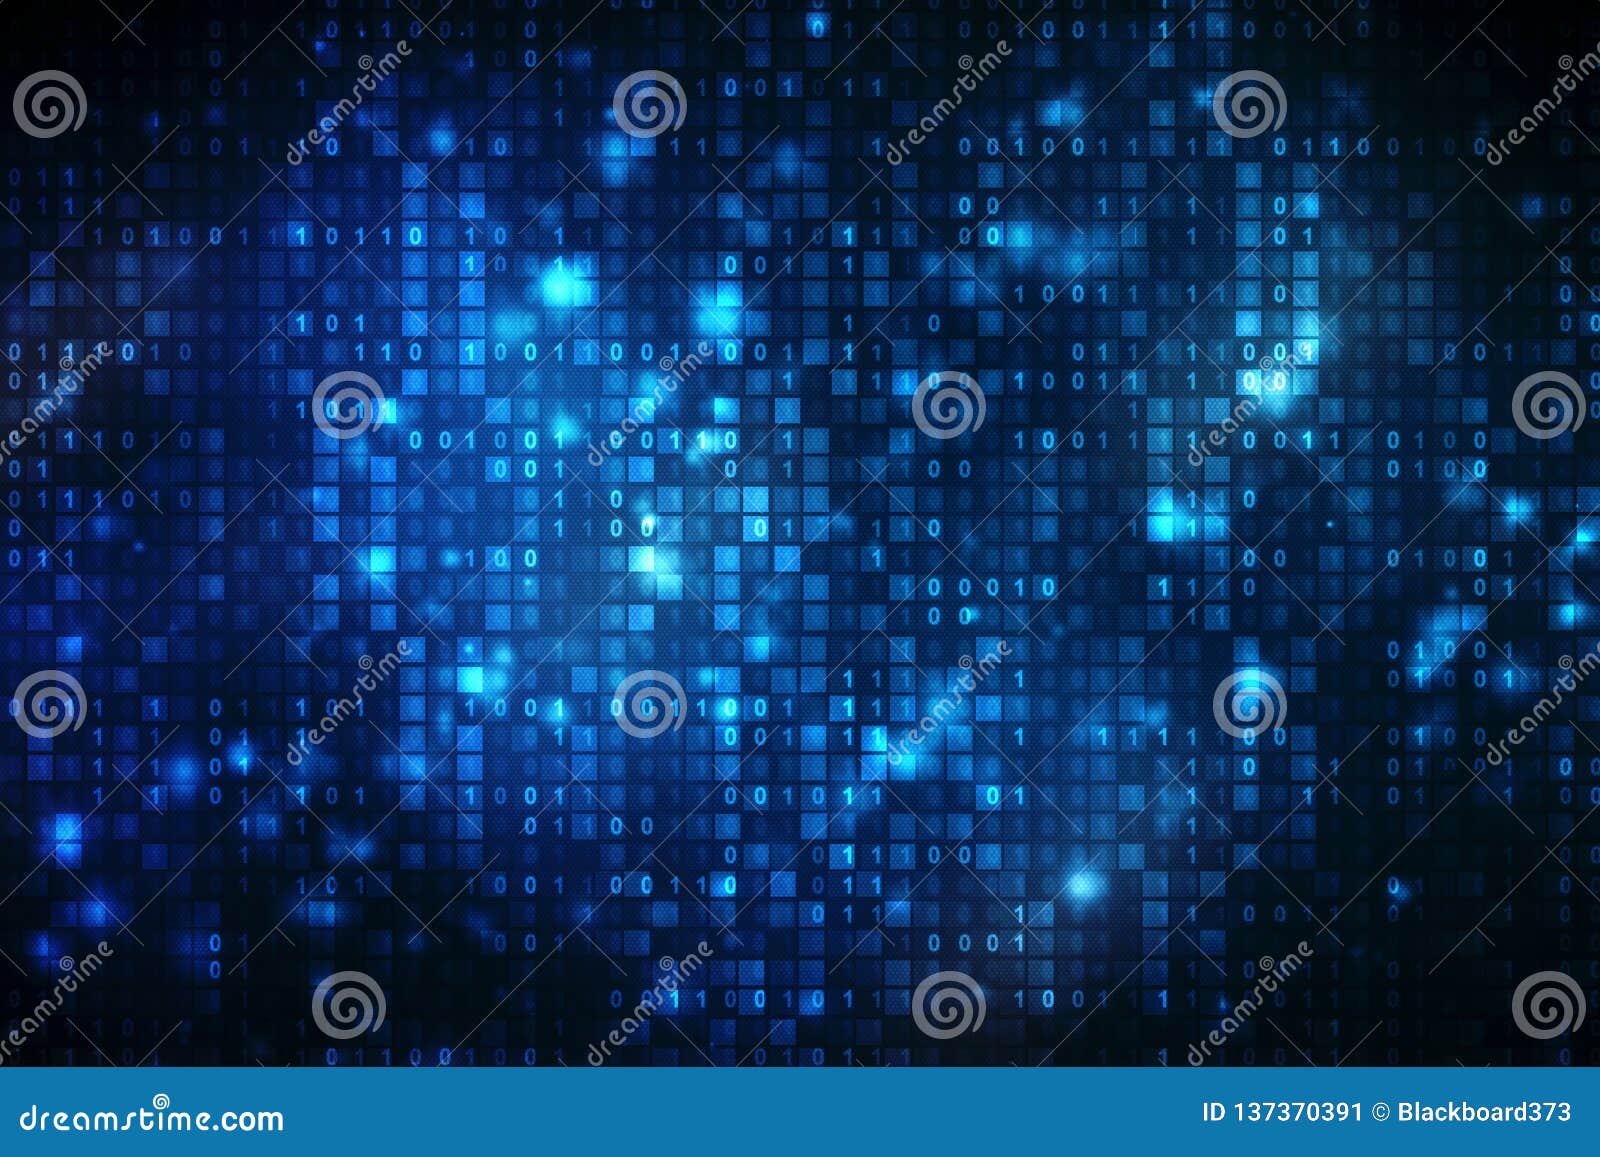 binary code background, digital abstract technology background, cyber abstract background